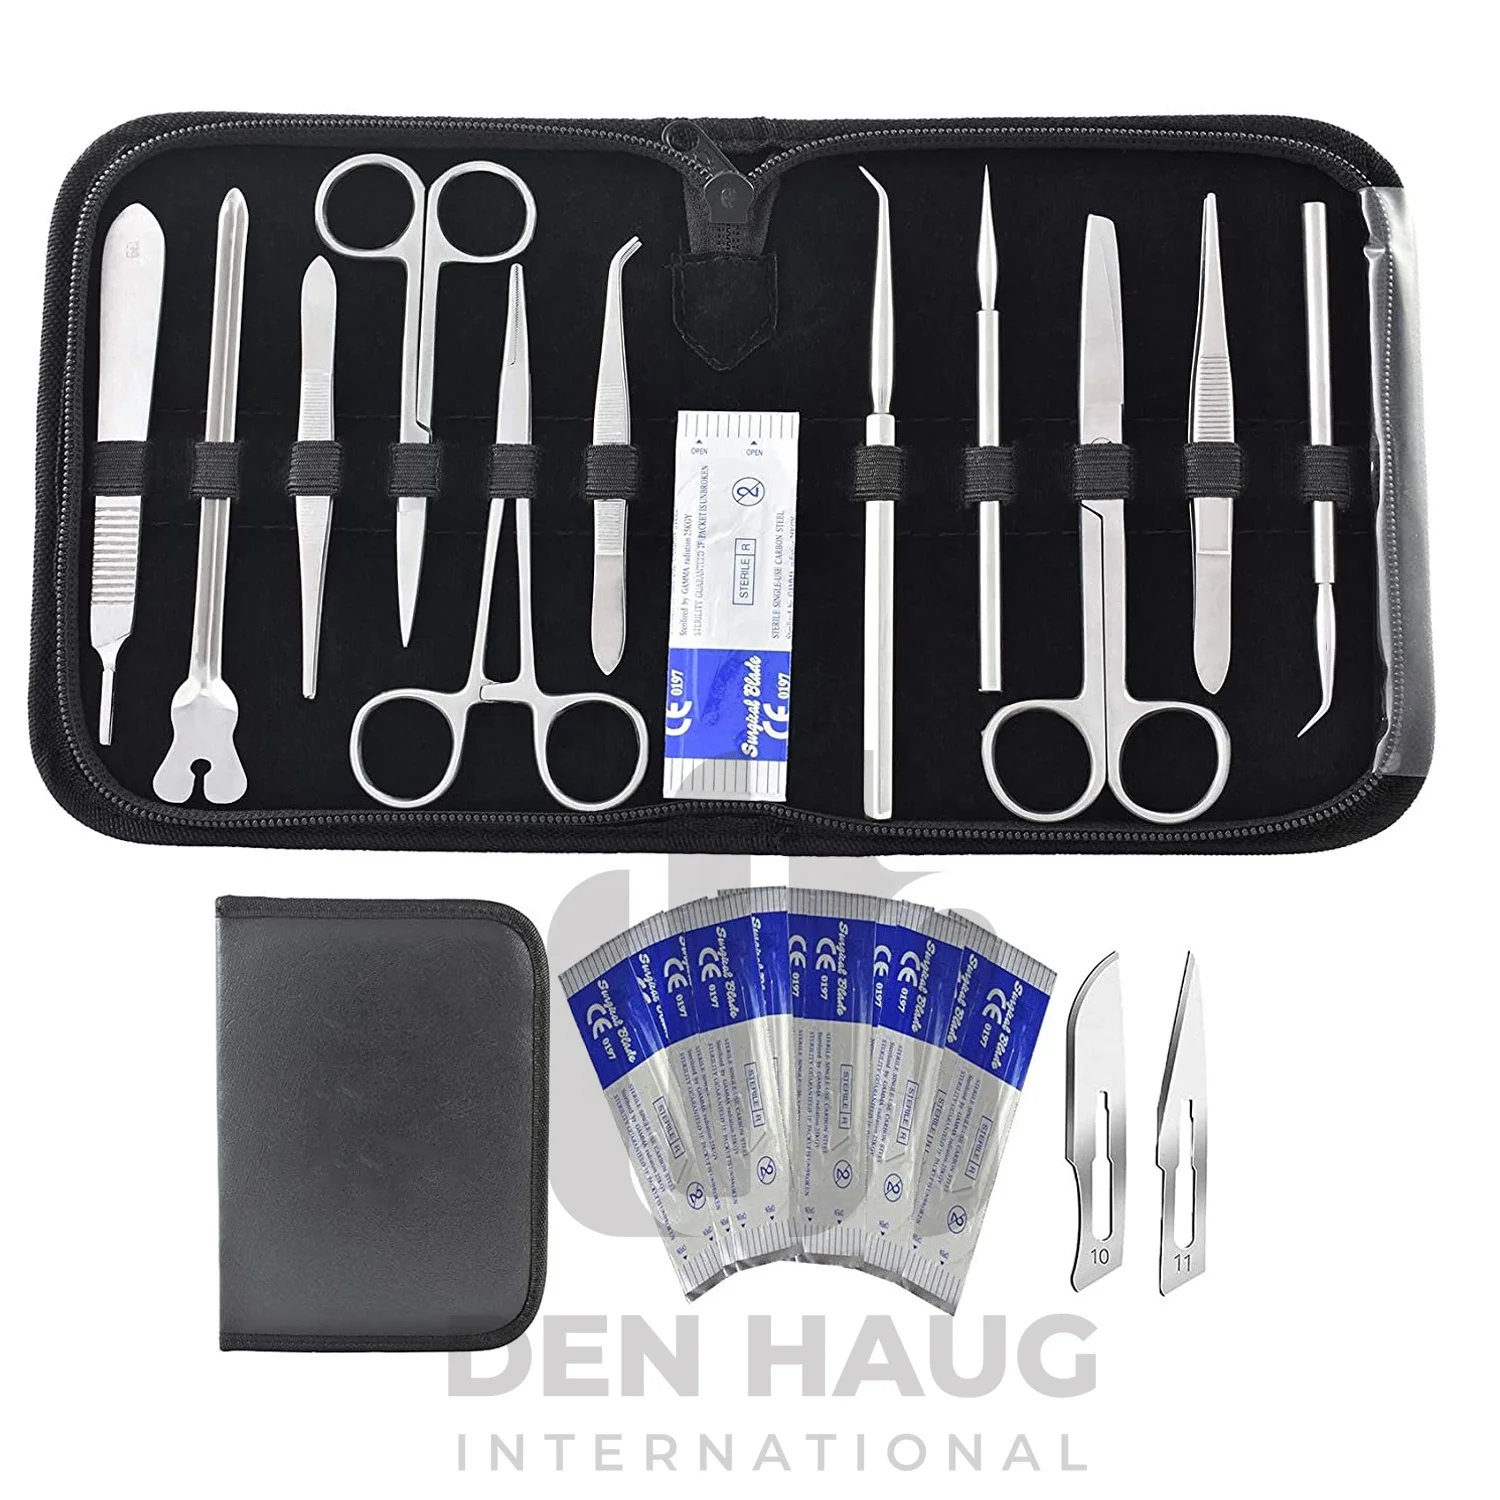 Tissue forceps suture set manufacturer advanced dissection instrument veterinary kit for anatomy biology General surgical tools